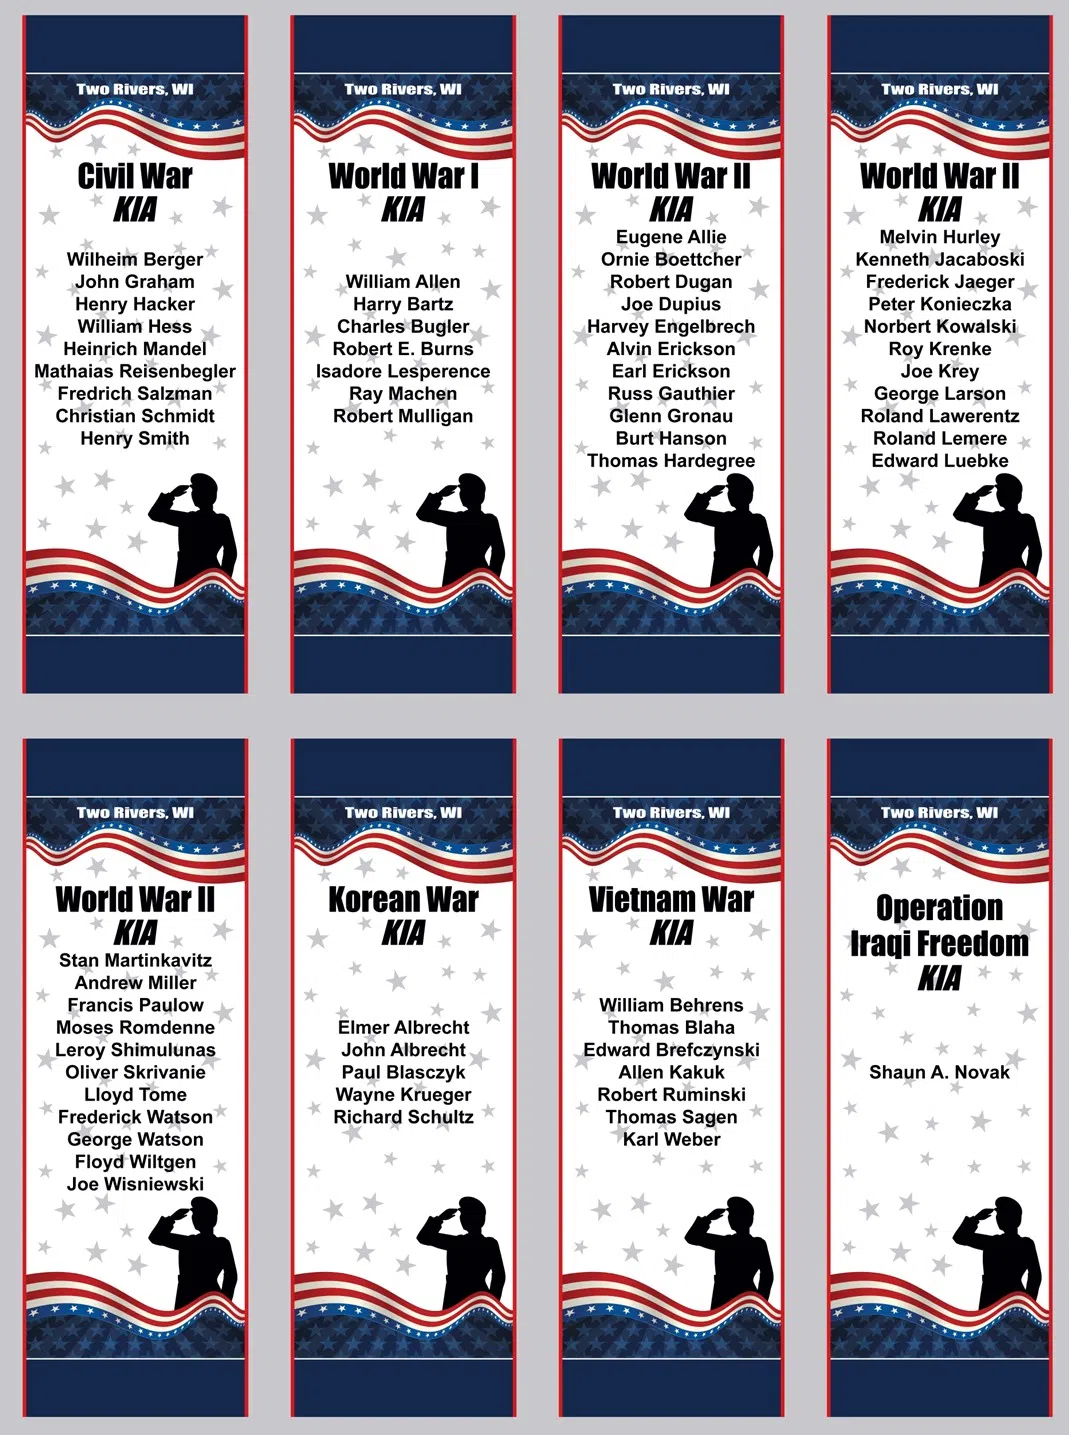 Two Rivers to Honor Military Heroes